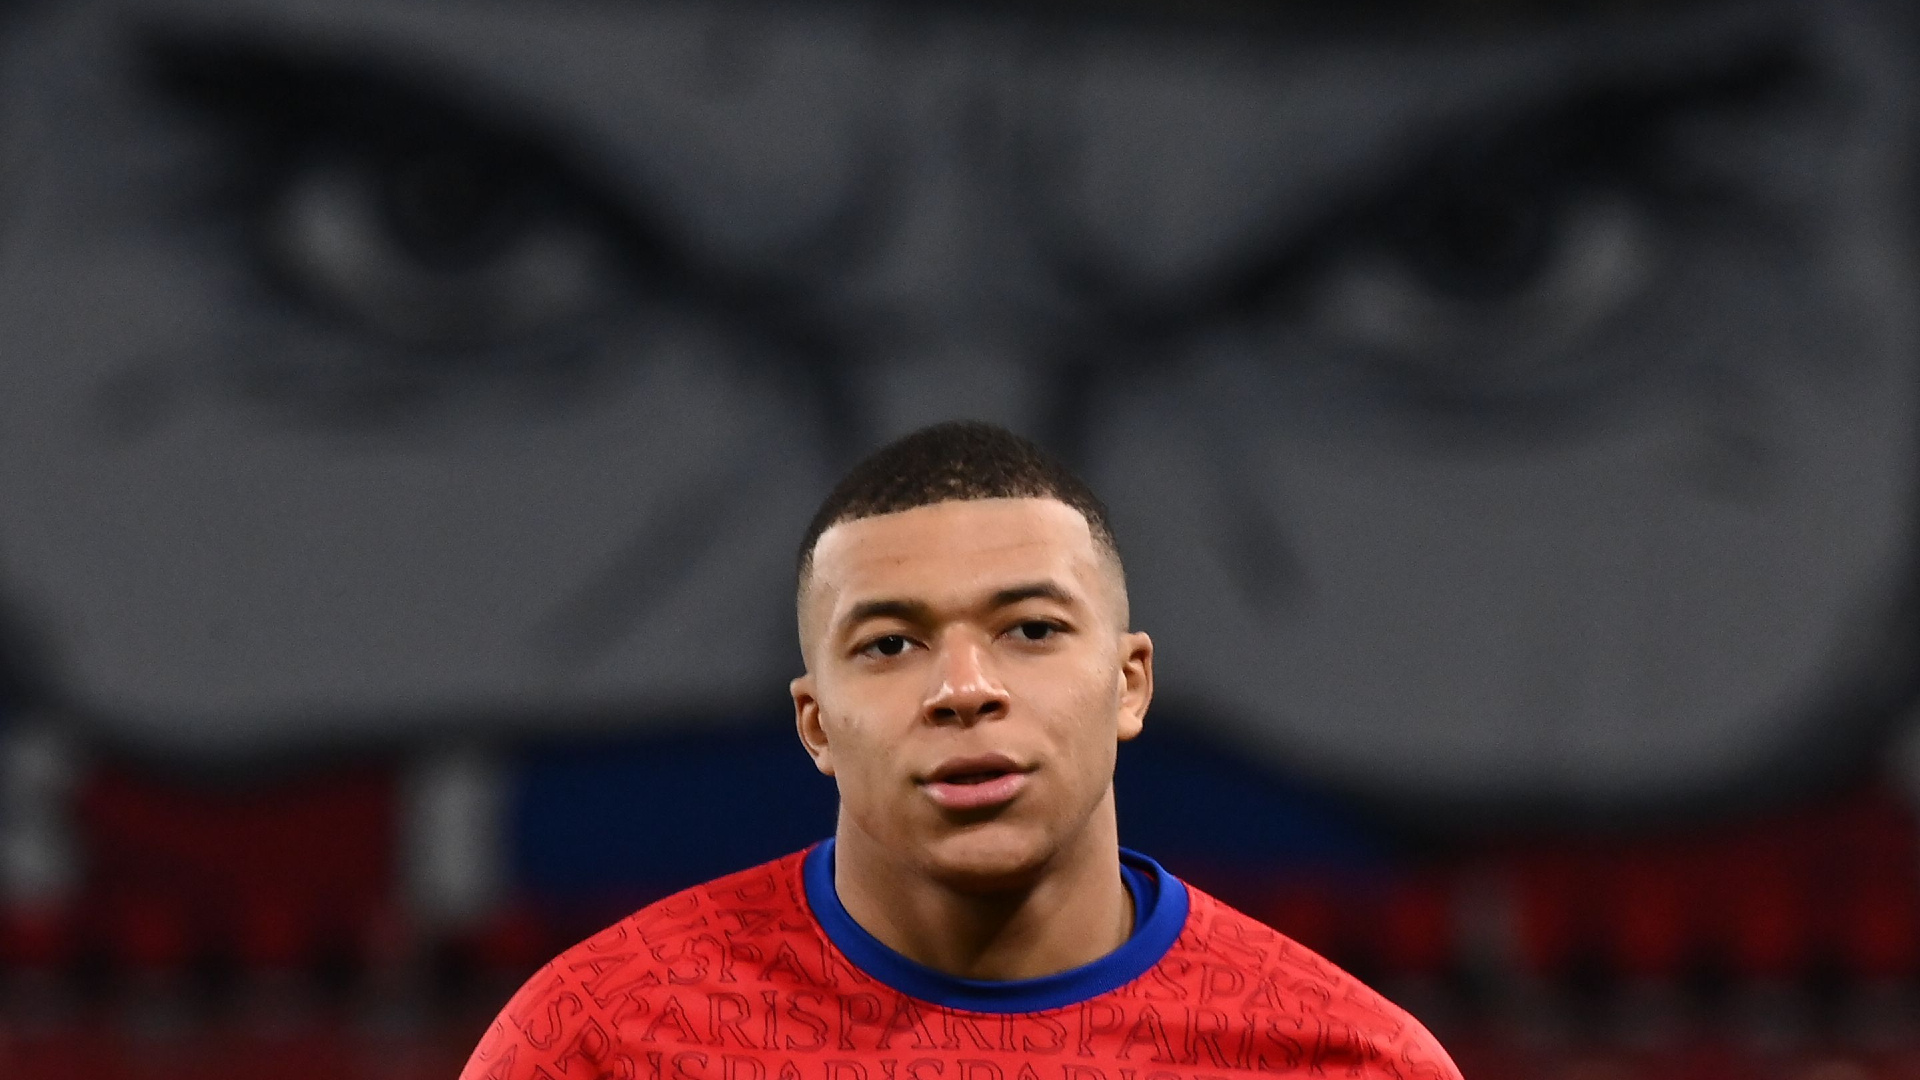 Mbappe's pace 'not normal' - PSG star's speed stuns Lille defender Botman